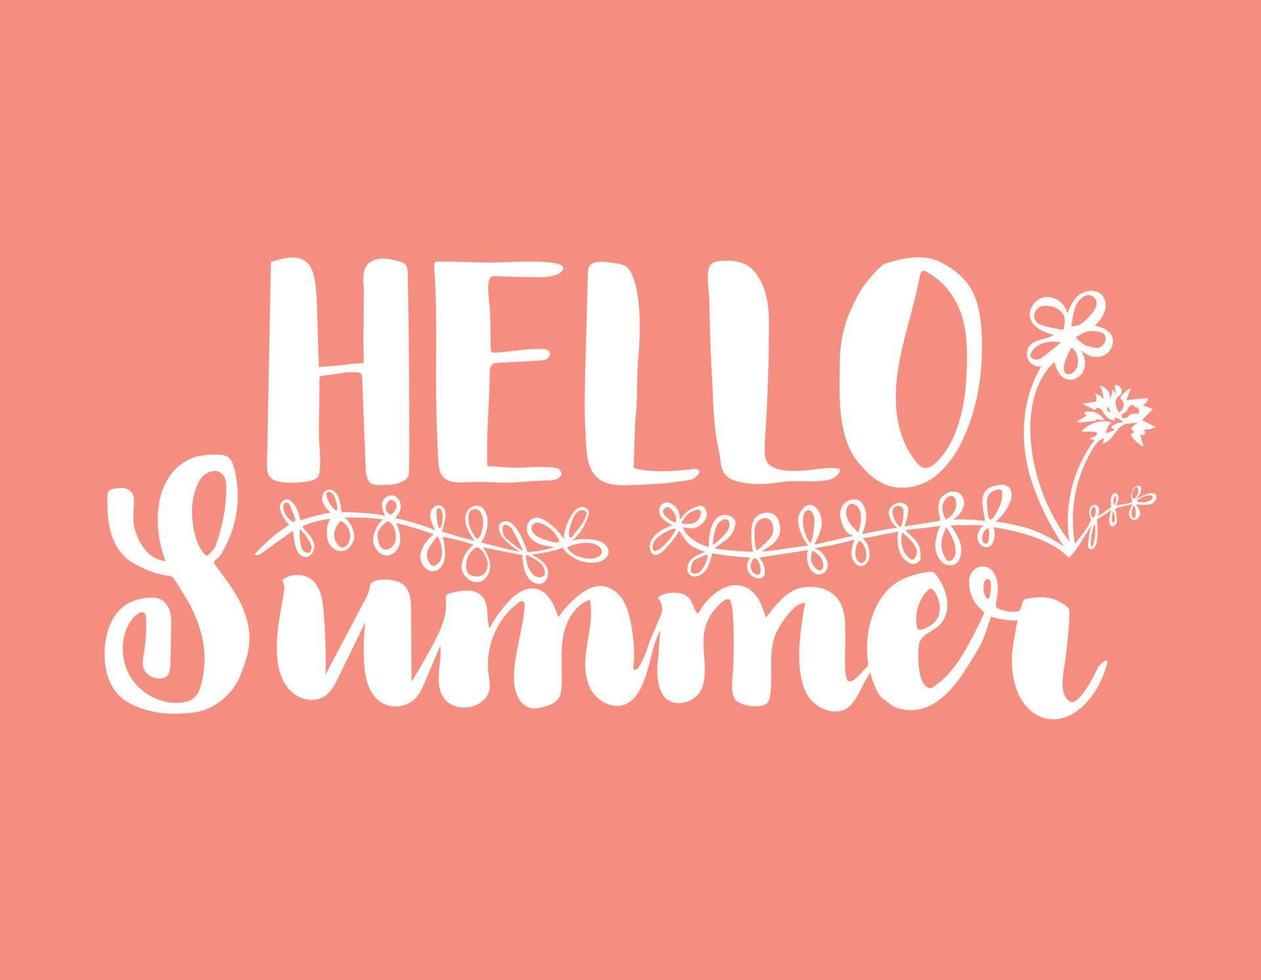 Hello summer hand drawn card to beginning of new season. Lettering design with flowers and plants illustration. Use for prints, posters, stickers, social media posts, apparel. vector